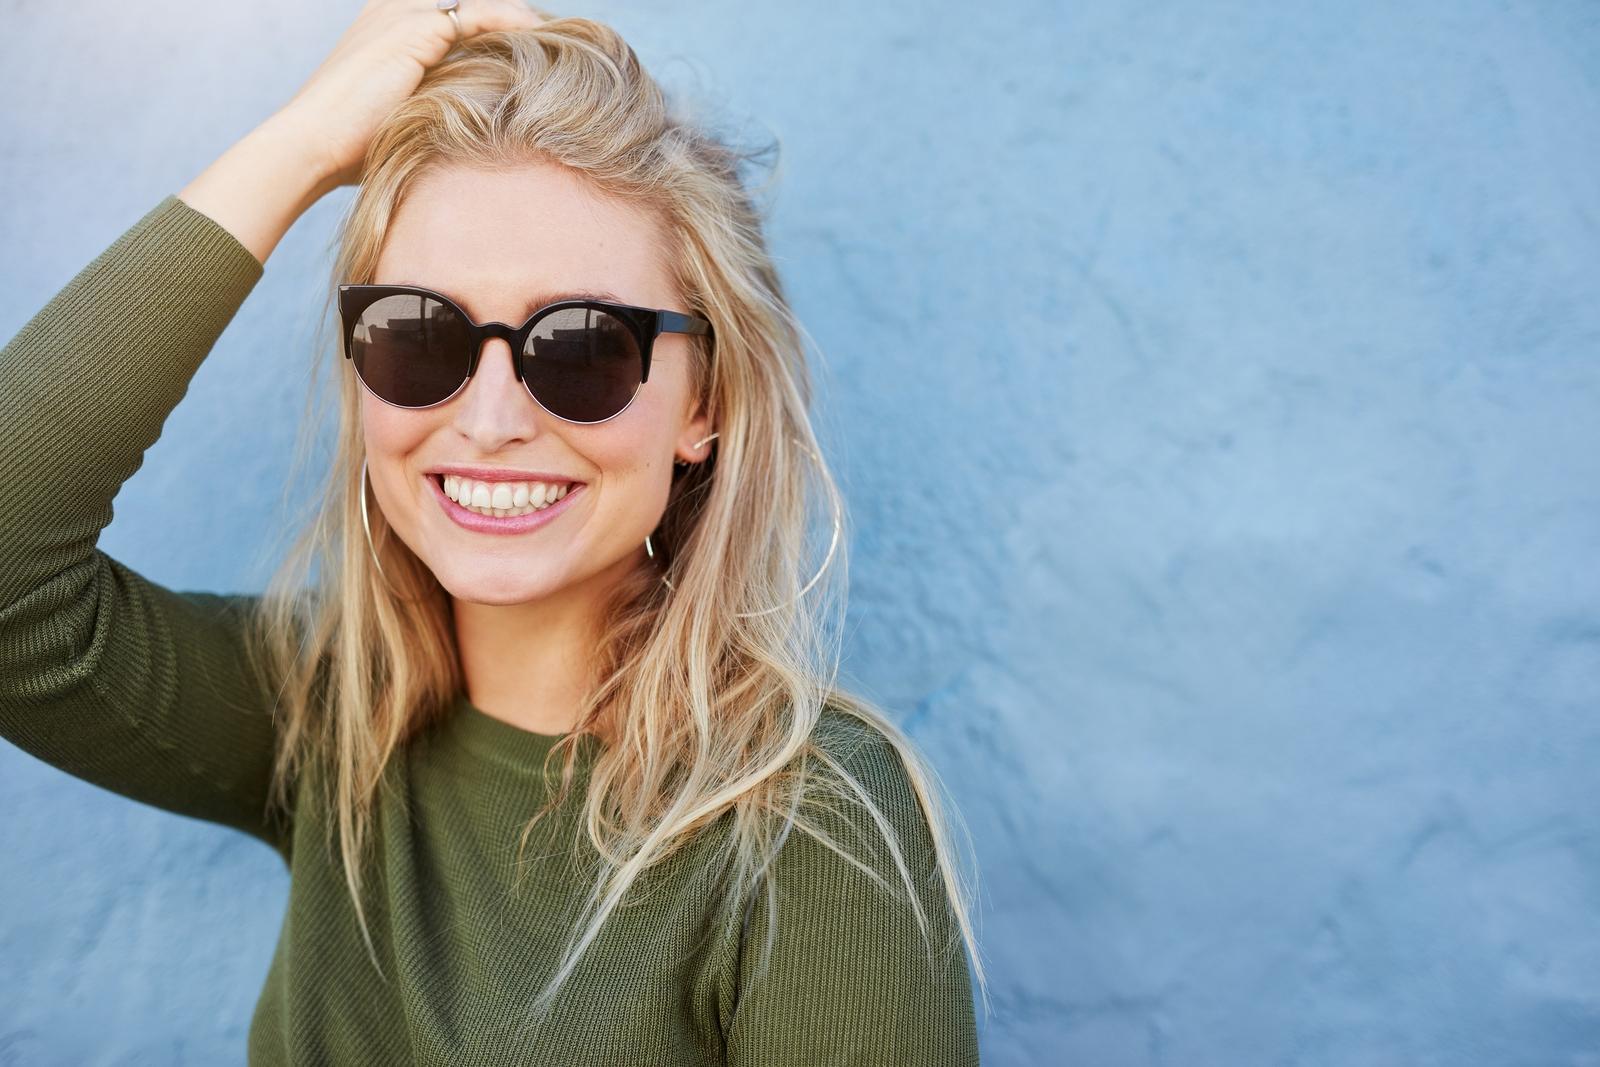 Get that Perfect Selfie Smile with Dental Braces from Our Southwest Houston Dental Office